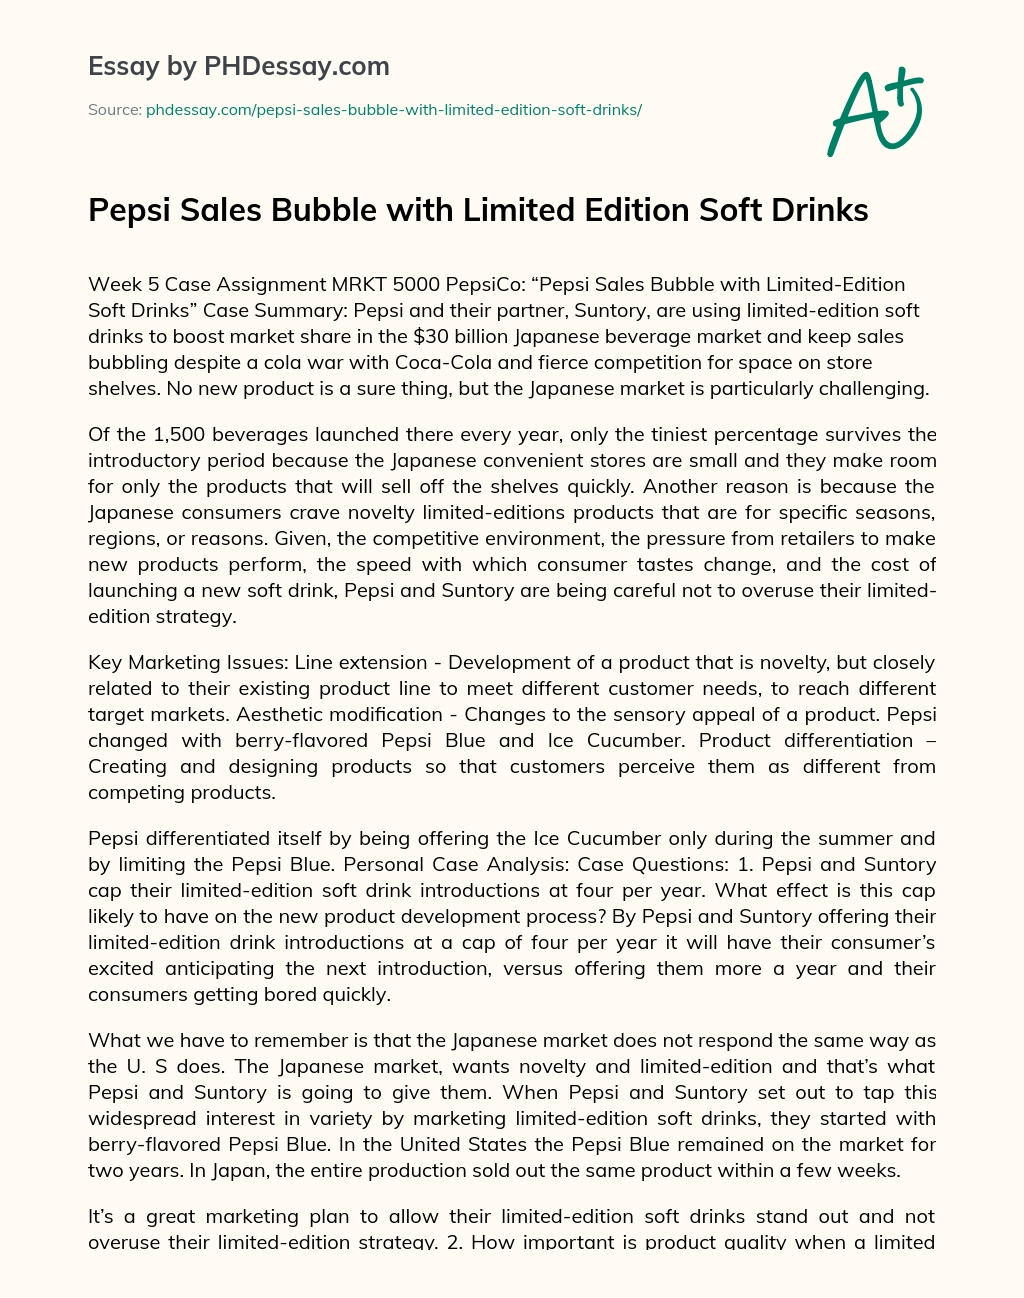 Pepsi Sales Bubble with Limited Edition Soft Drinks essay